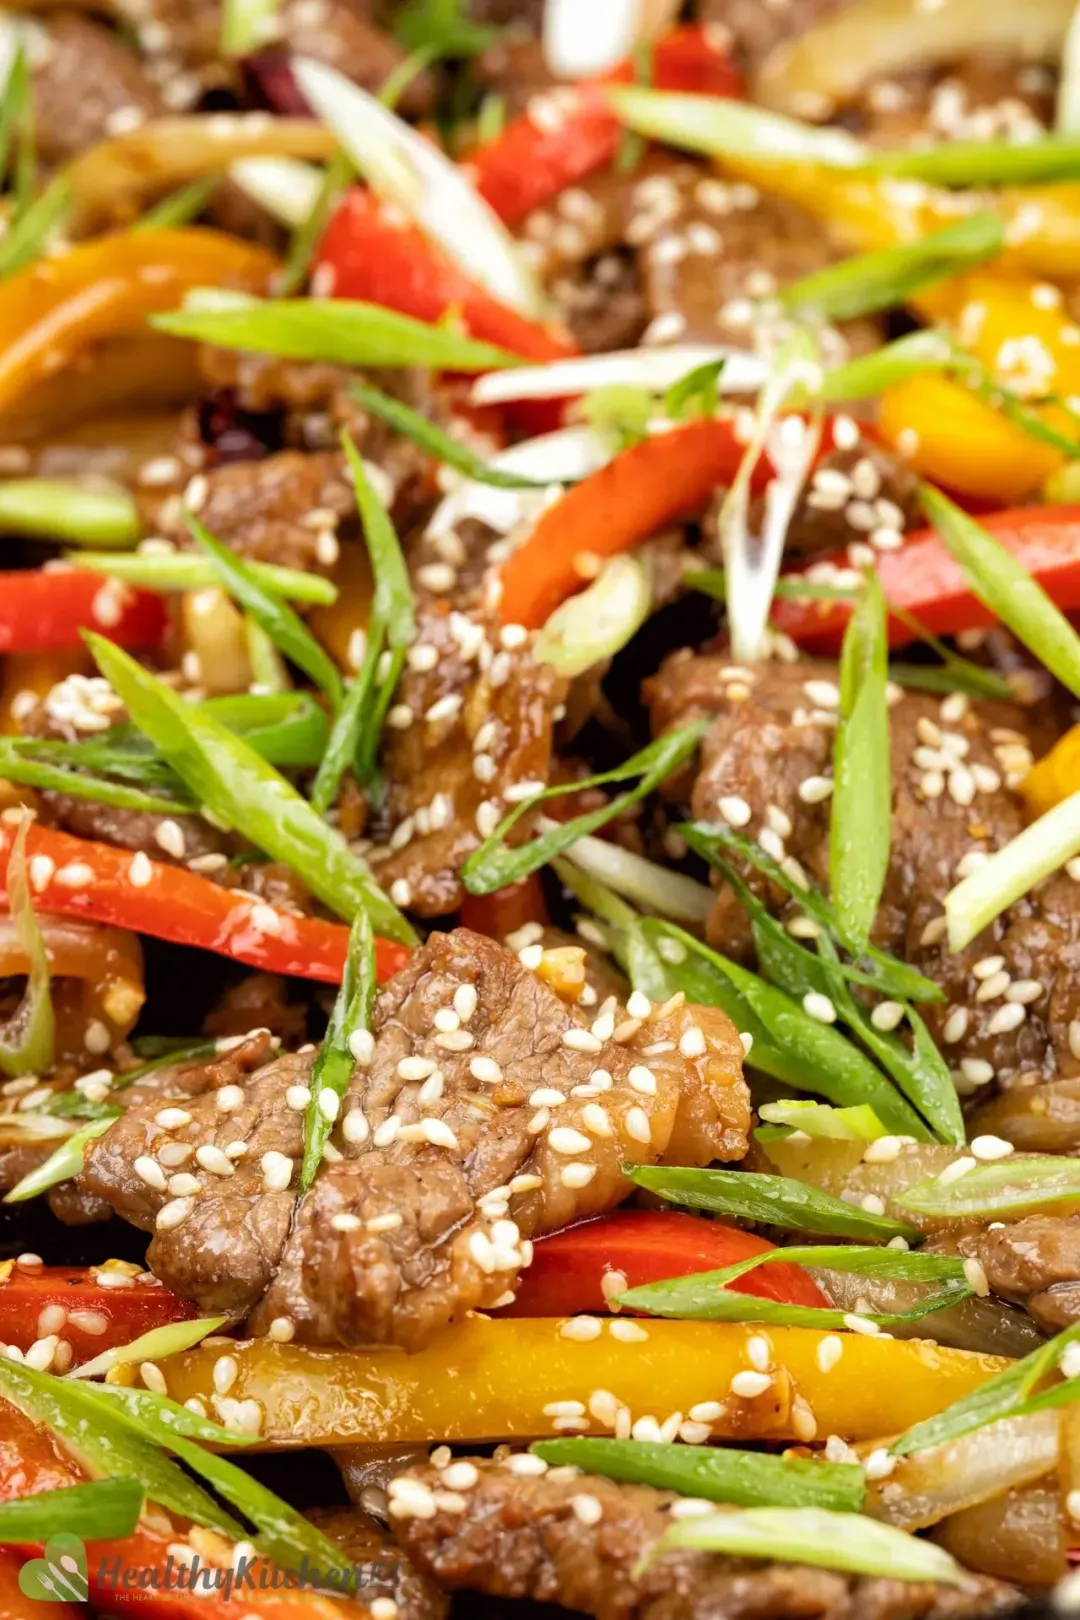 Healthy Pepper Steak Recipe - Your Favorite Takeout Made At Home